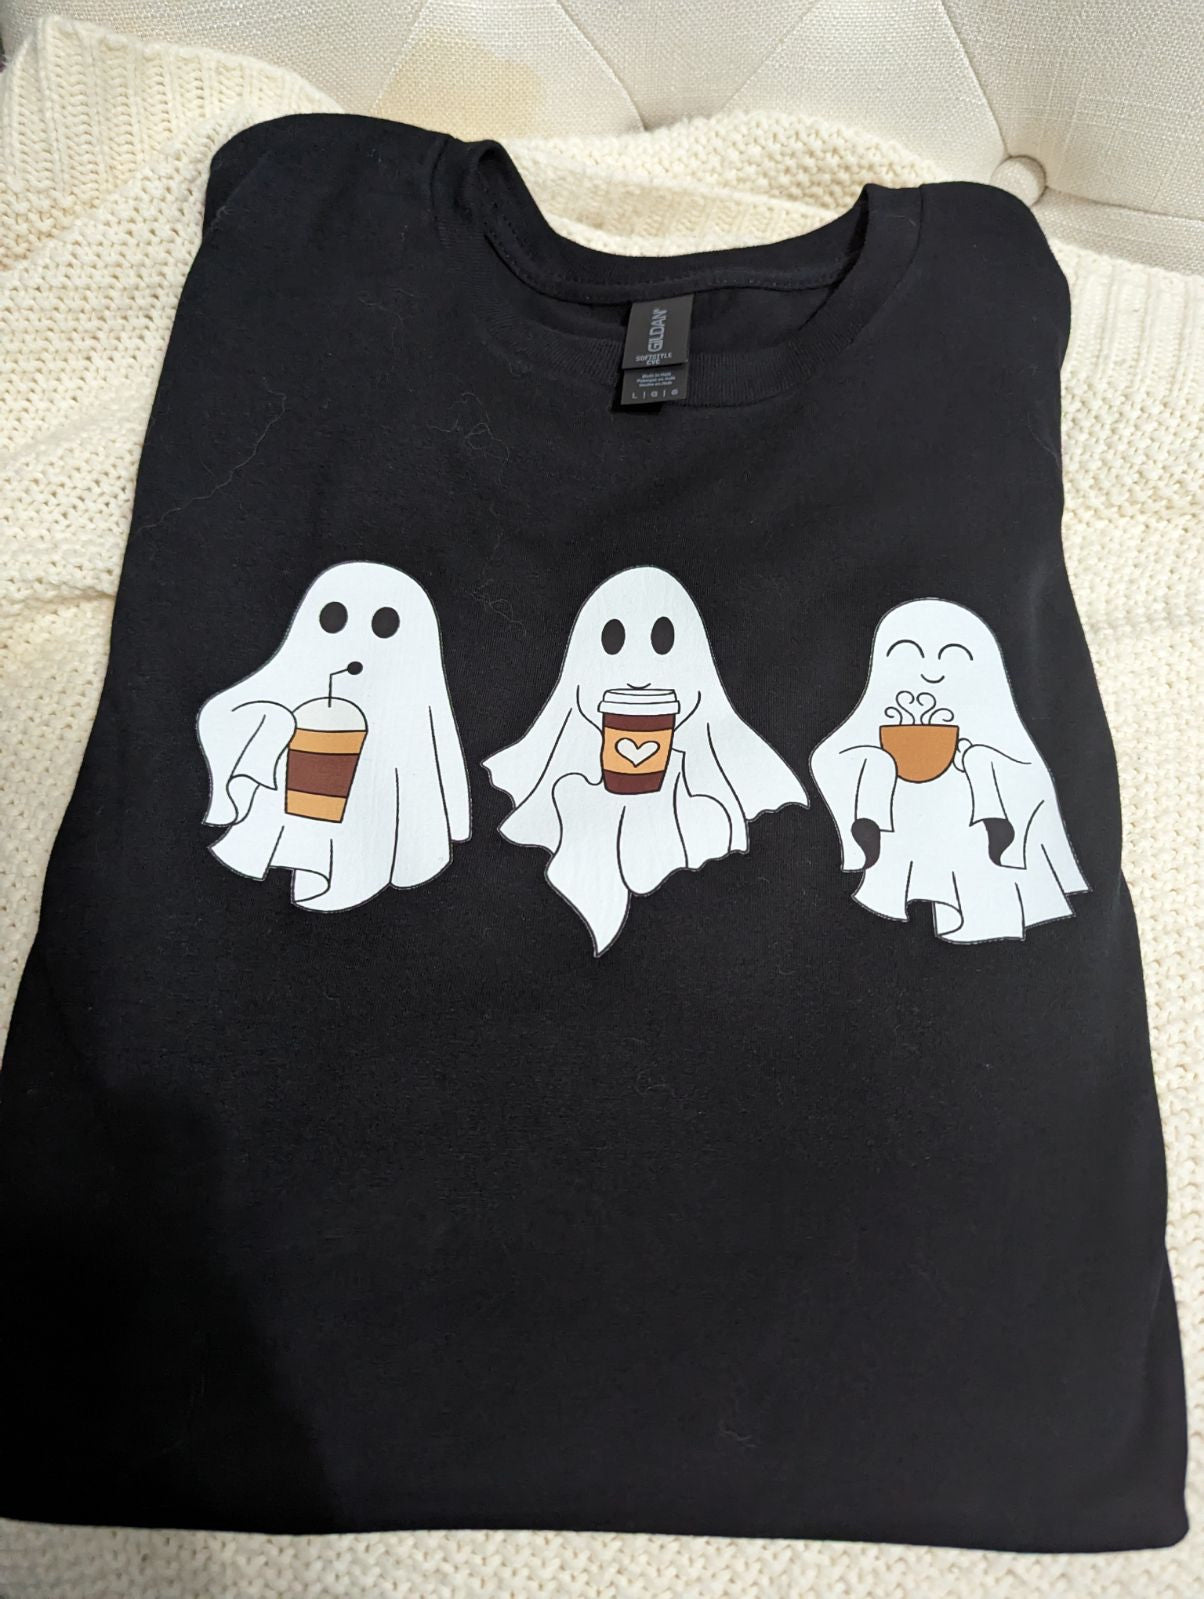 Cute Ghost Drink Coffee, Ghost With Coffee, Fall Ghost, Spooky Coffee Lovers